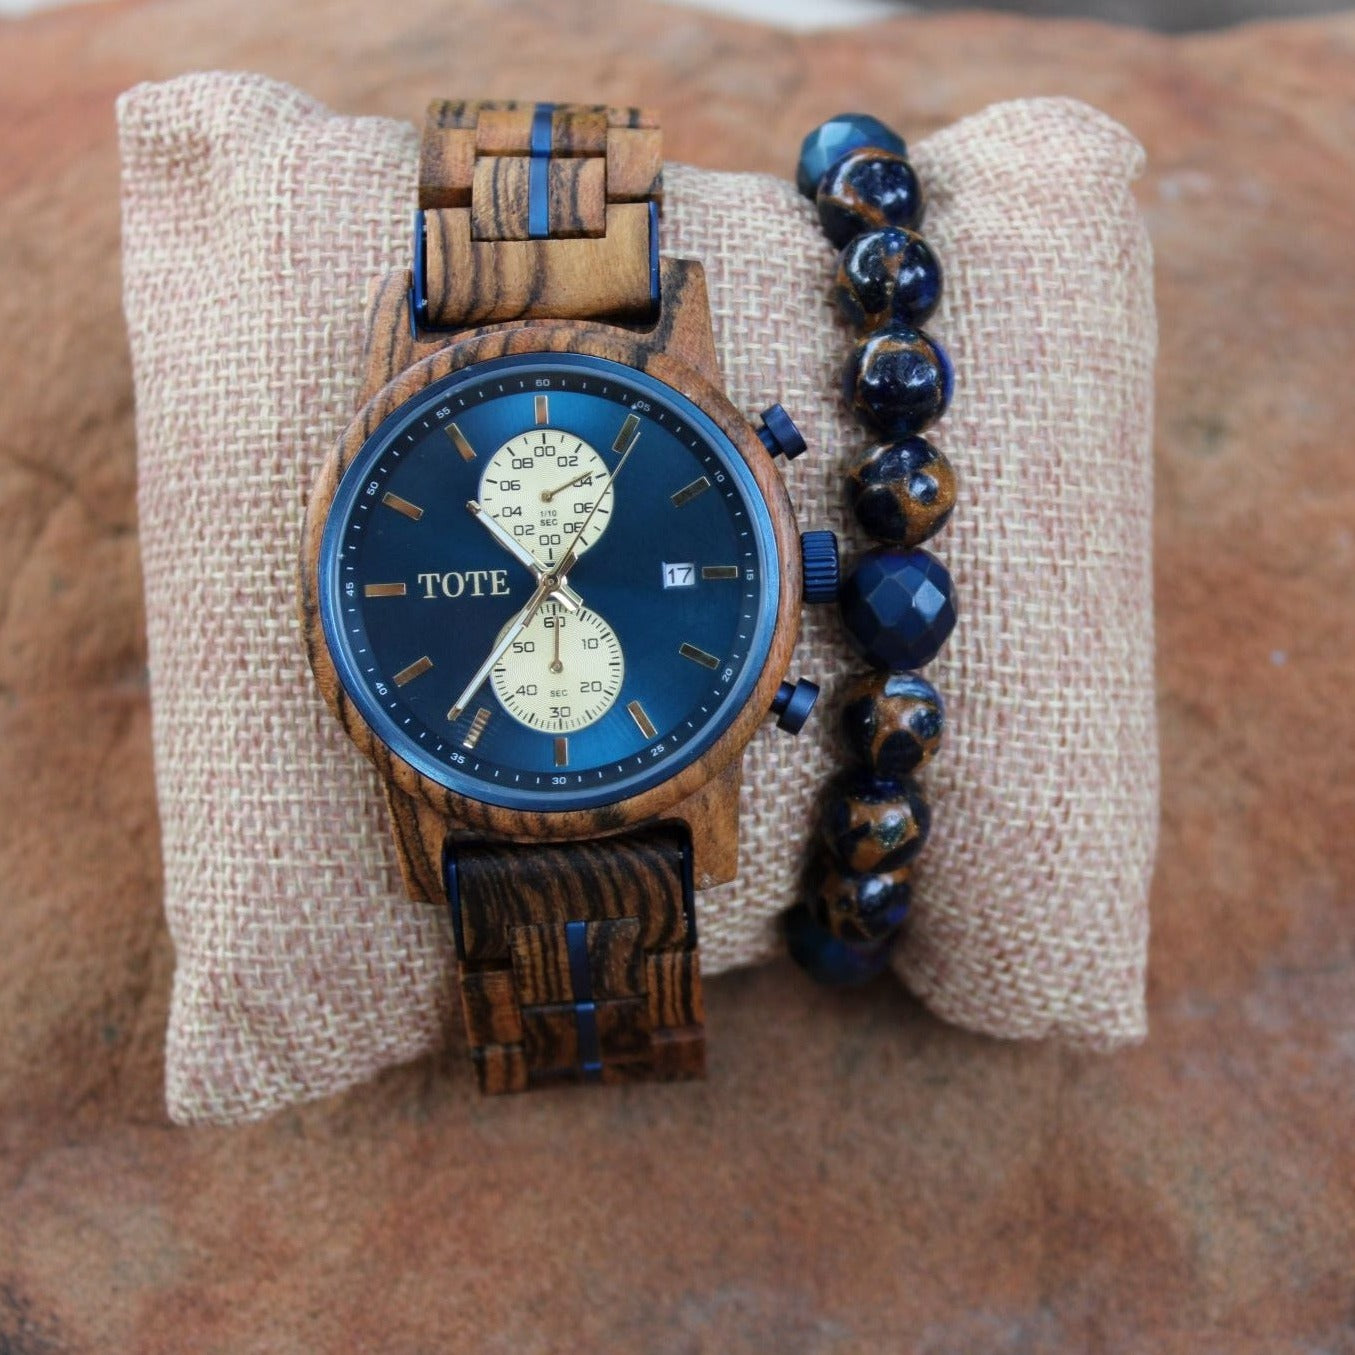 Times of the Essence (TOTE) wood watch Allure coupled with our Bead Bracelet Marble Blue from our Classics collection (sold separately).